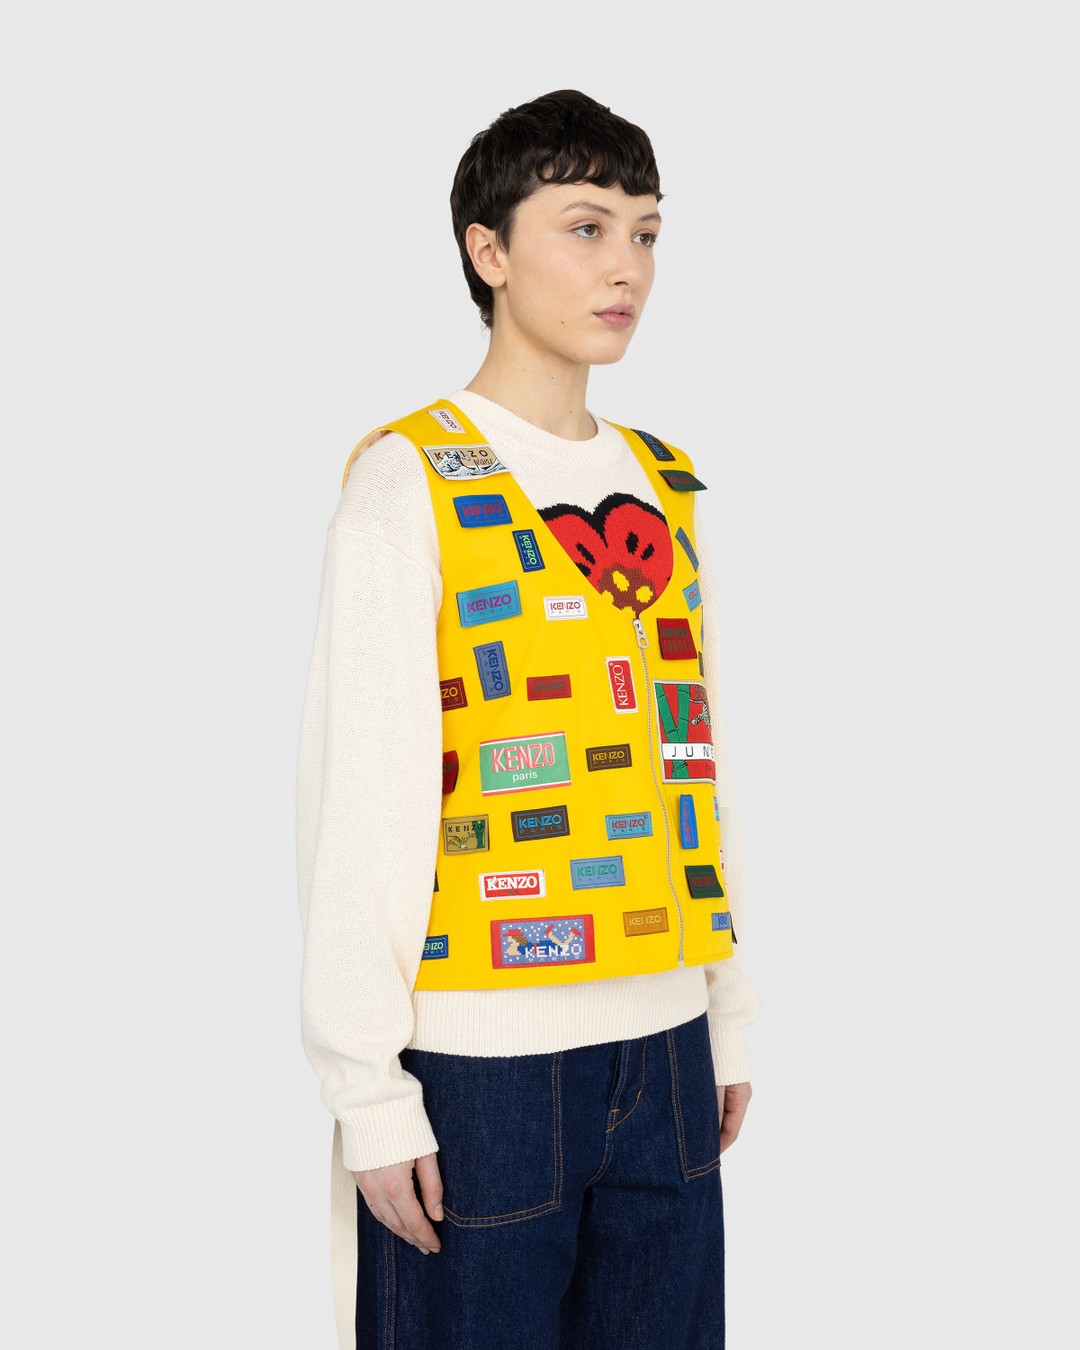 Hectare Rang Mart Kenzo – 'Archives Labels' Vest | Highsnobiety Shop